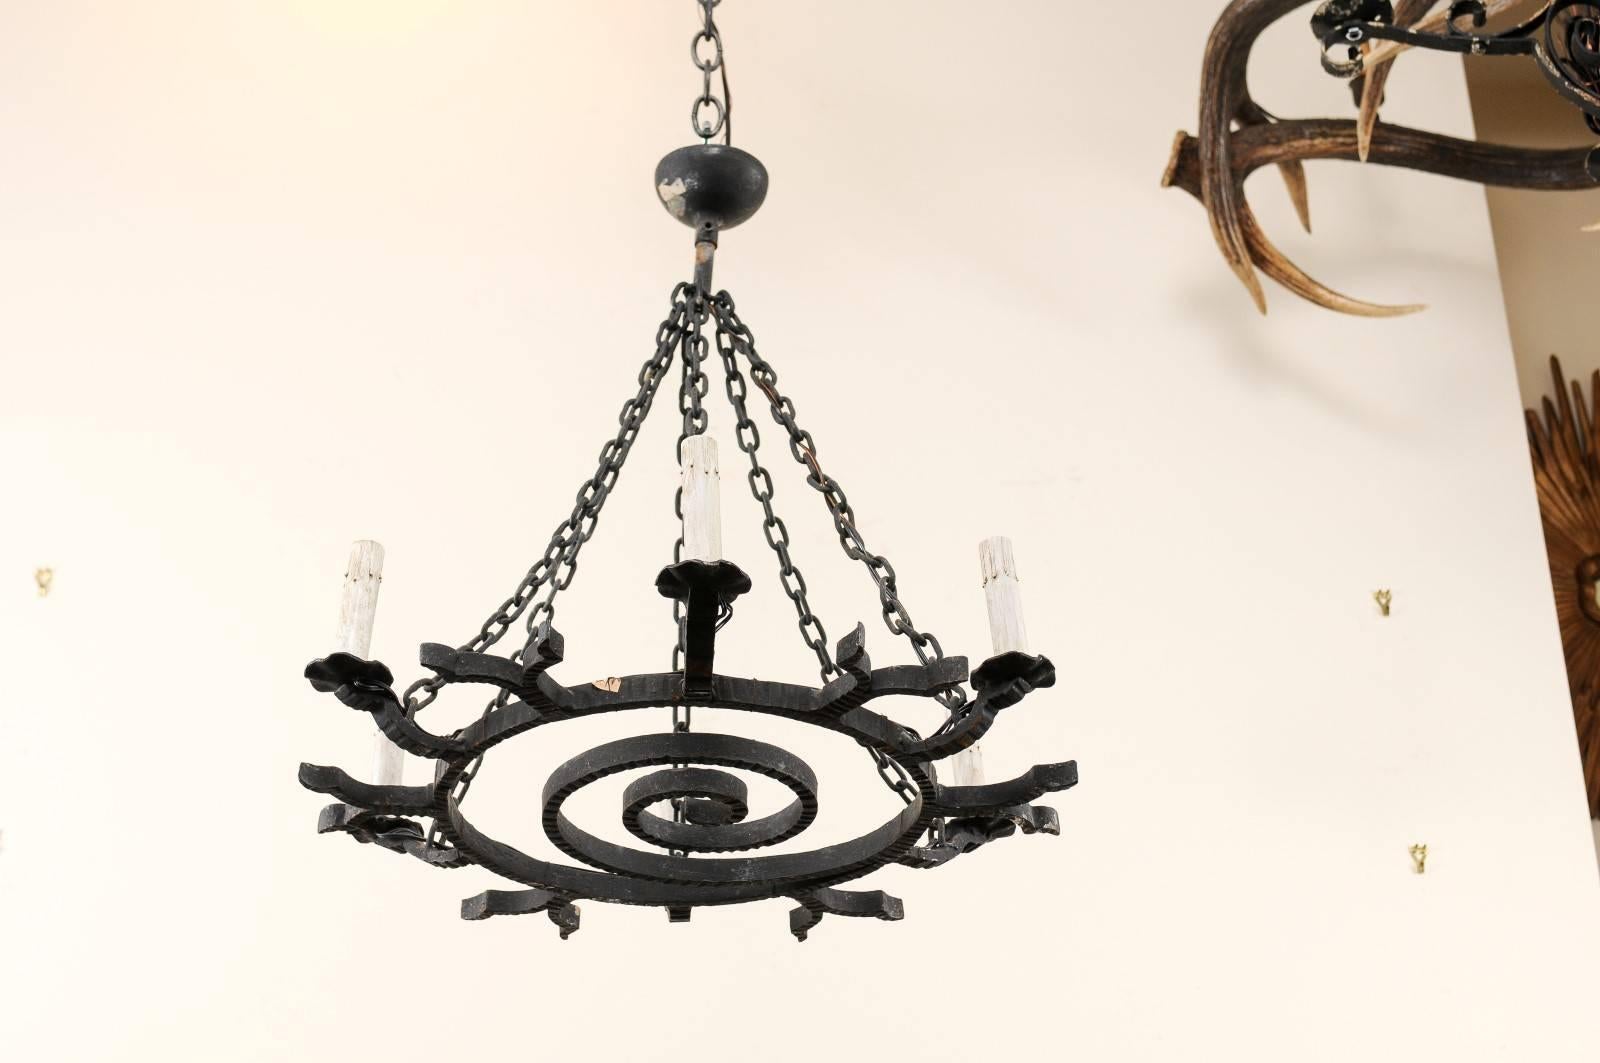 A French forged iron chandelier from the 1950s. This unique French mid-century chandelier has a whimsical spiral decoration filling up its central ring. There are six lights which lift up and away from the middle ring with alternating with